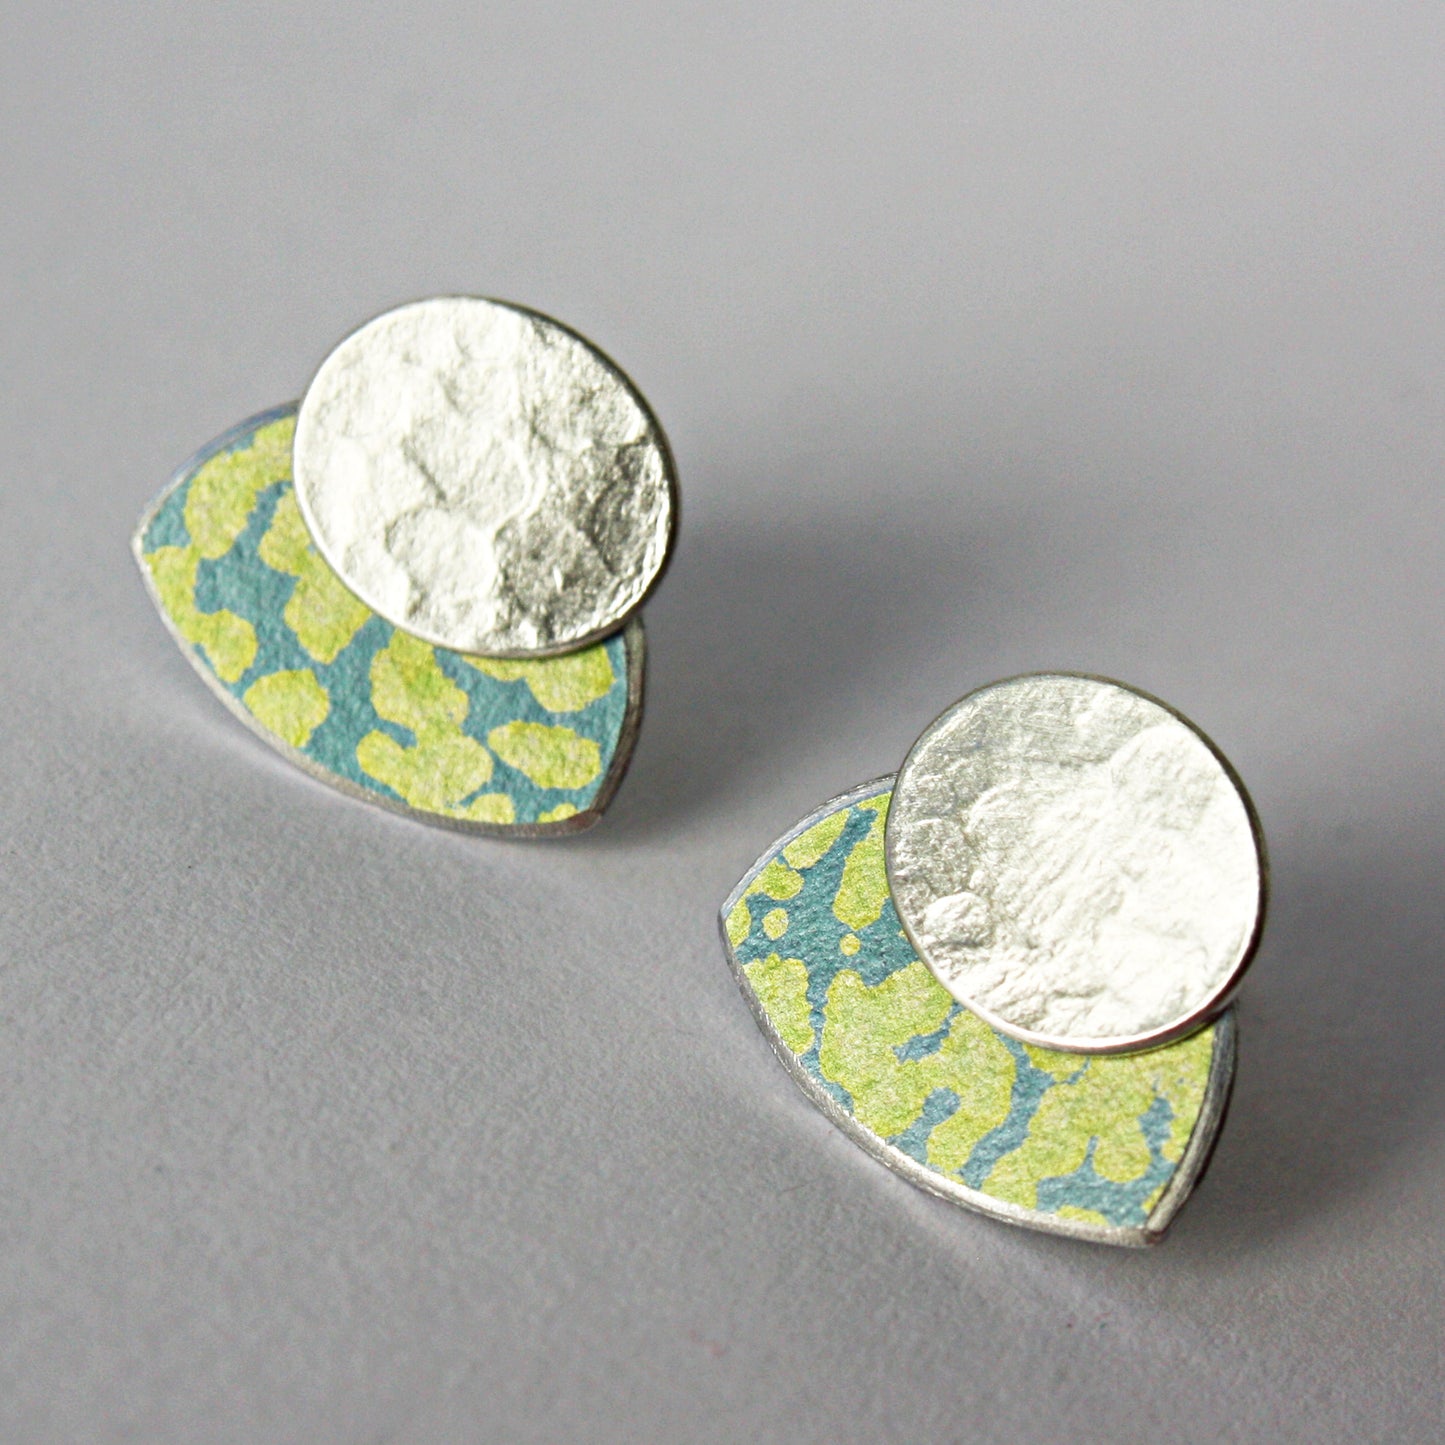 LCH1 Small silver oval and patterned anodised aluminium stud earrings